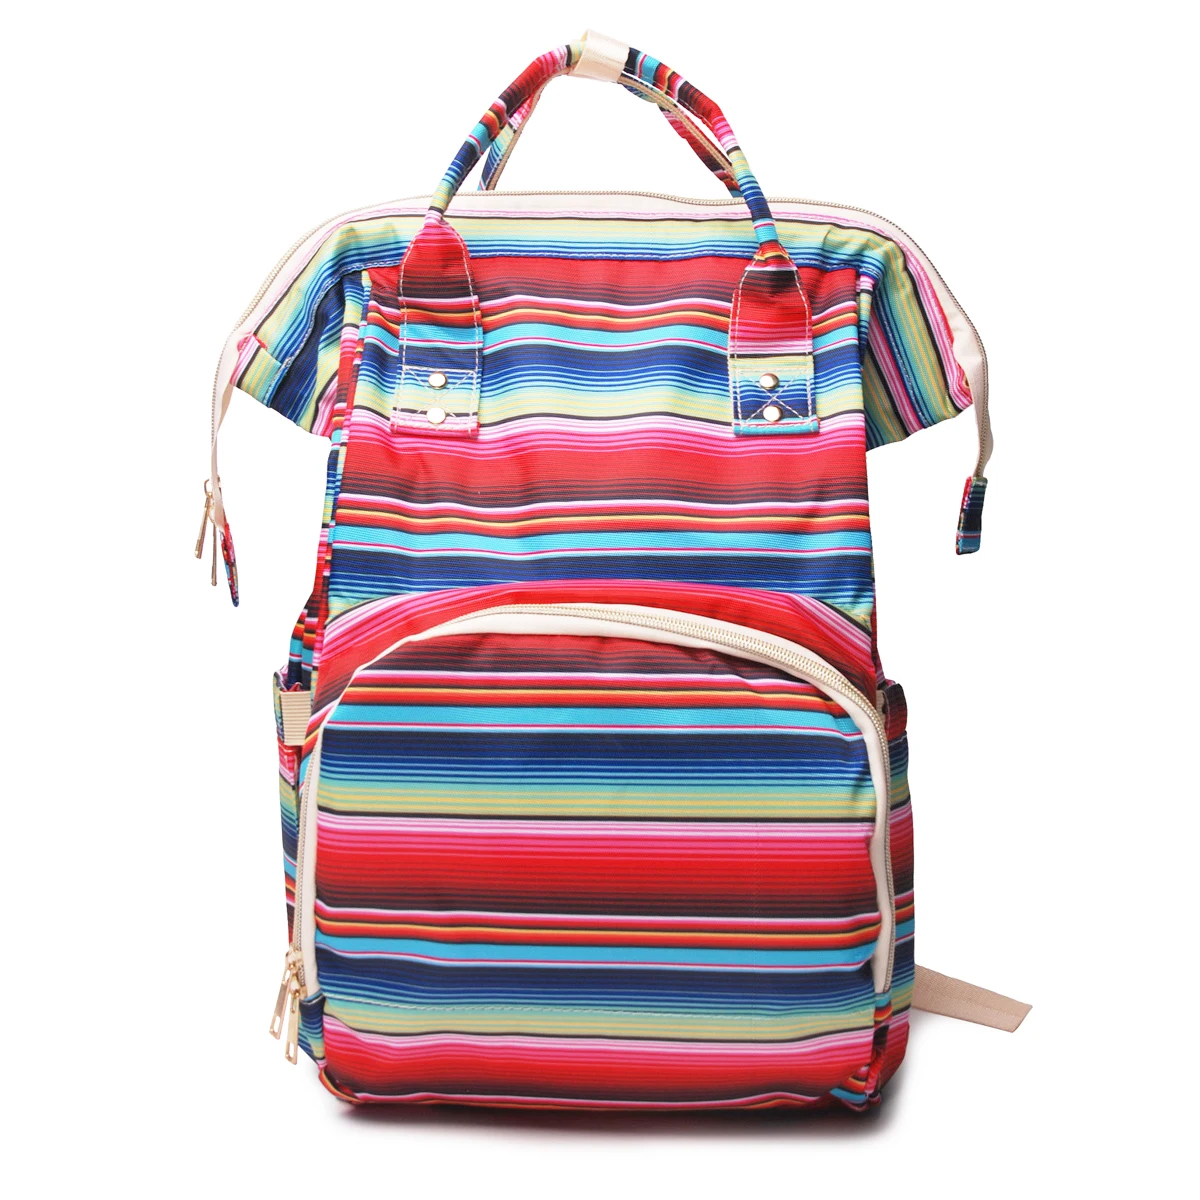 

Wholesale Mummy Diaper Backpack Striped Print Baby Care Diaper Bag Backpack Canvas Multi-Function Diaper Bag DOM-1081276, Serape, aztec, llama, leopard and so on,